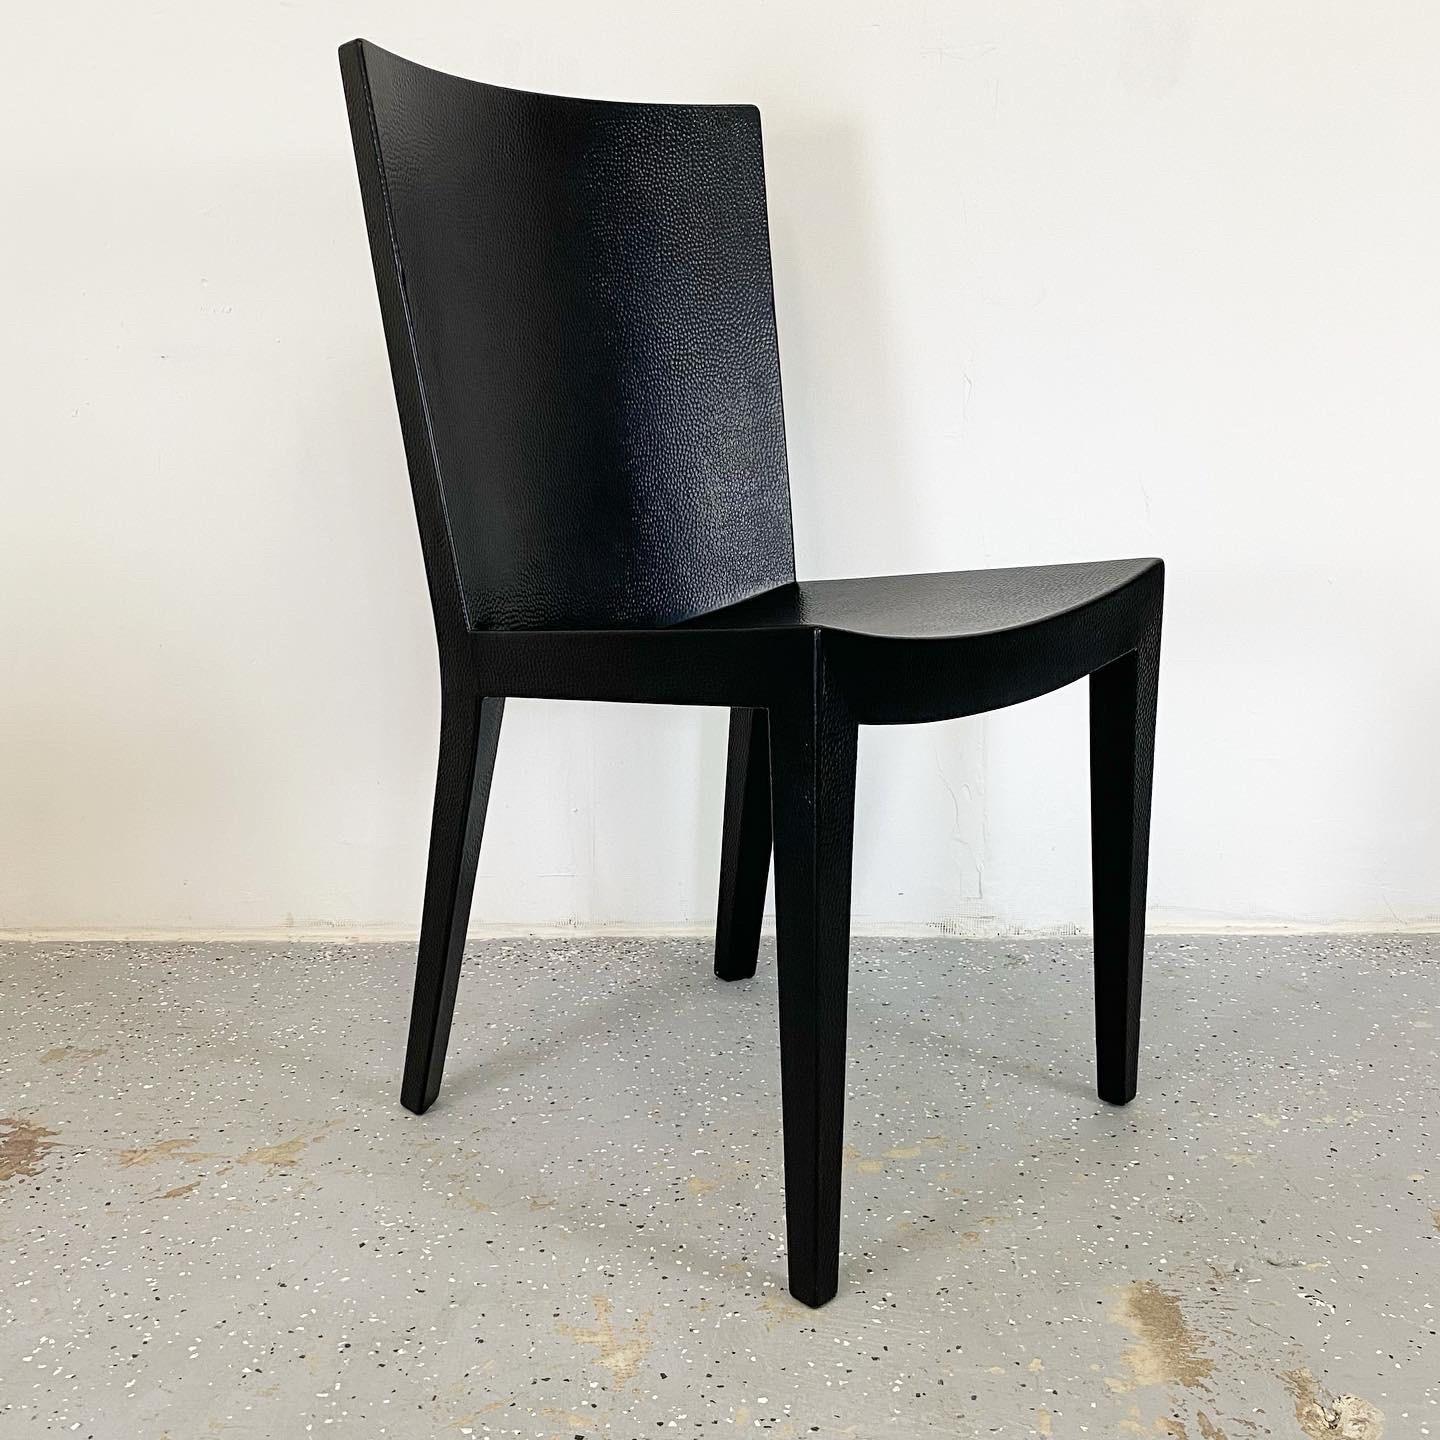 A stunning restored set of Jean-Michel Frank Chairs by Karl Springer. These have reptile skin stamped leather, newly refinished with a matte black lacquer.